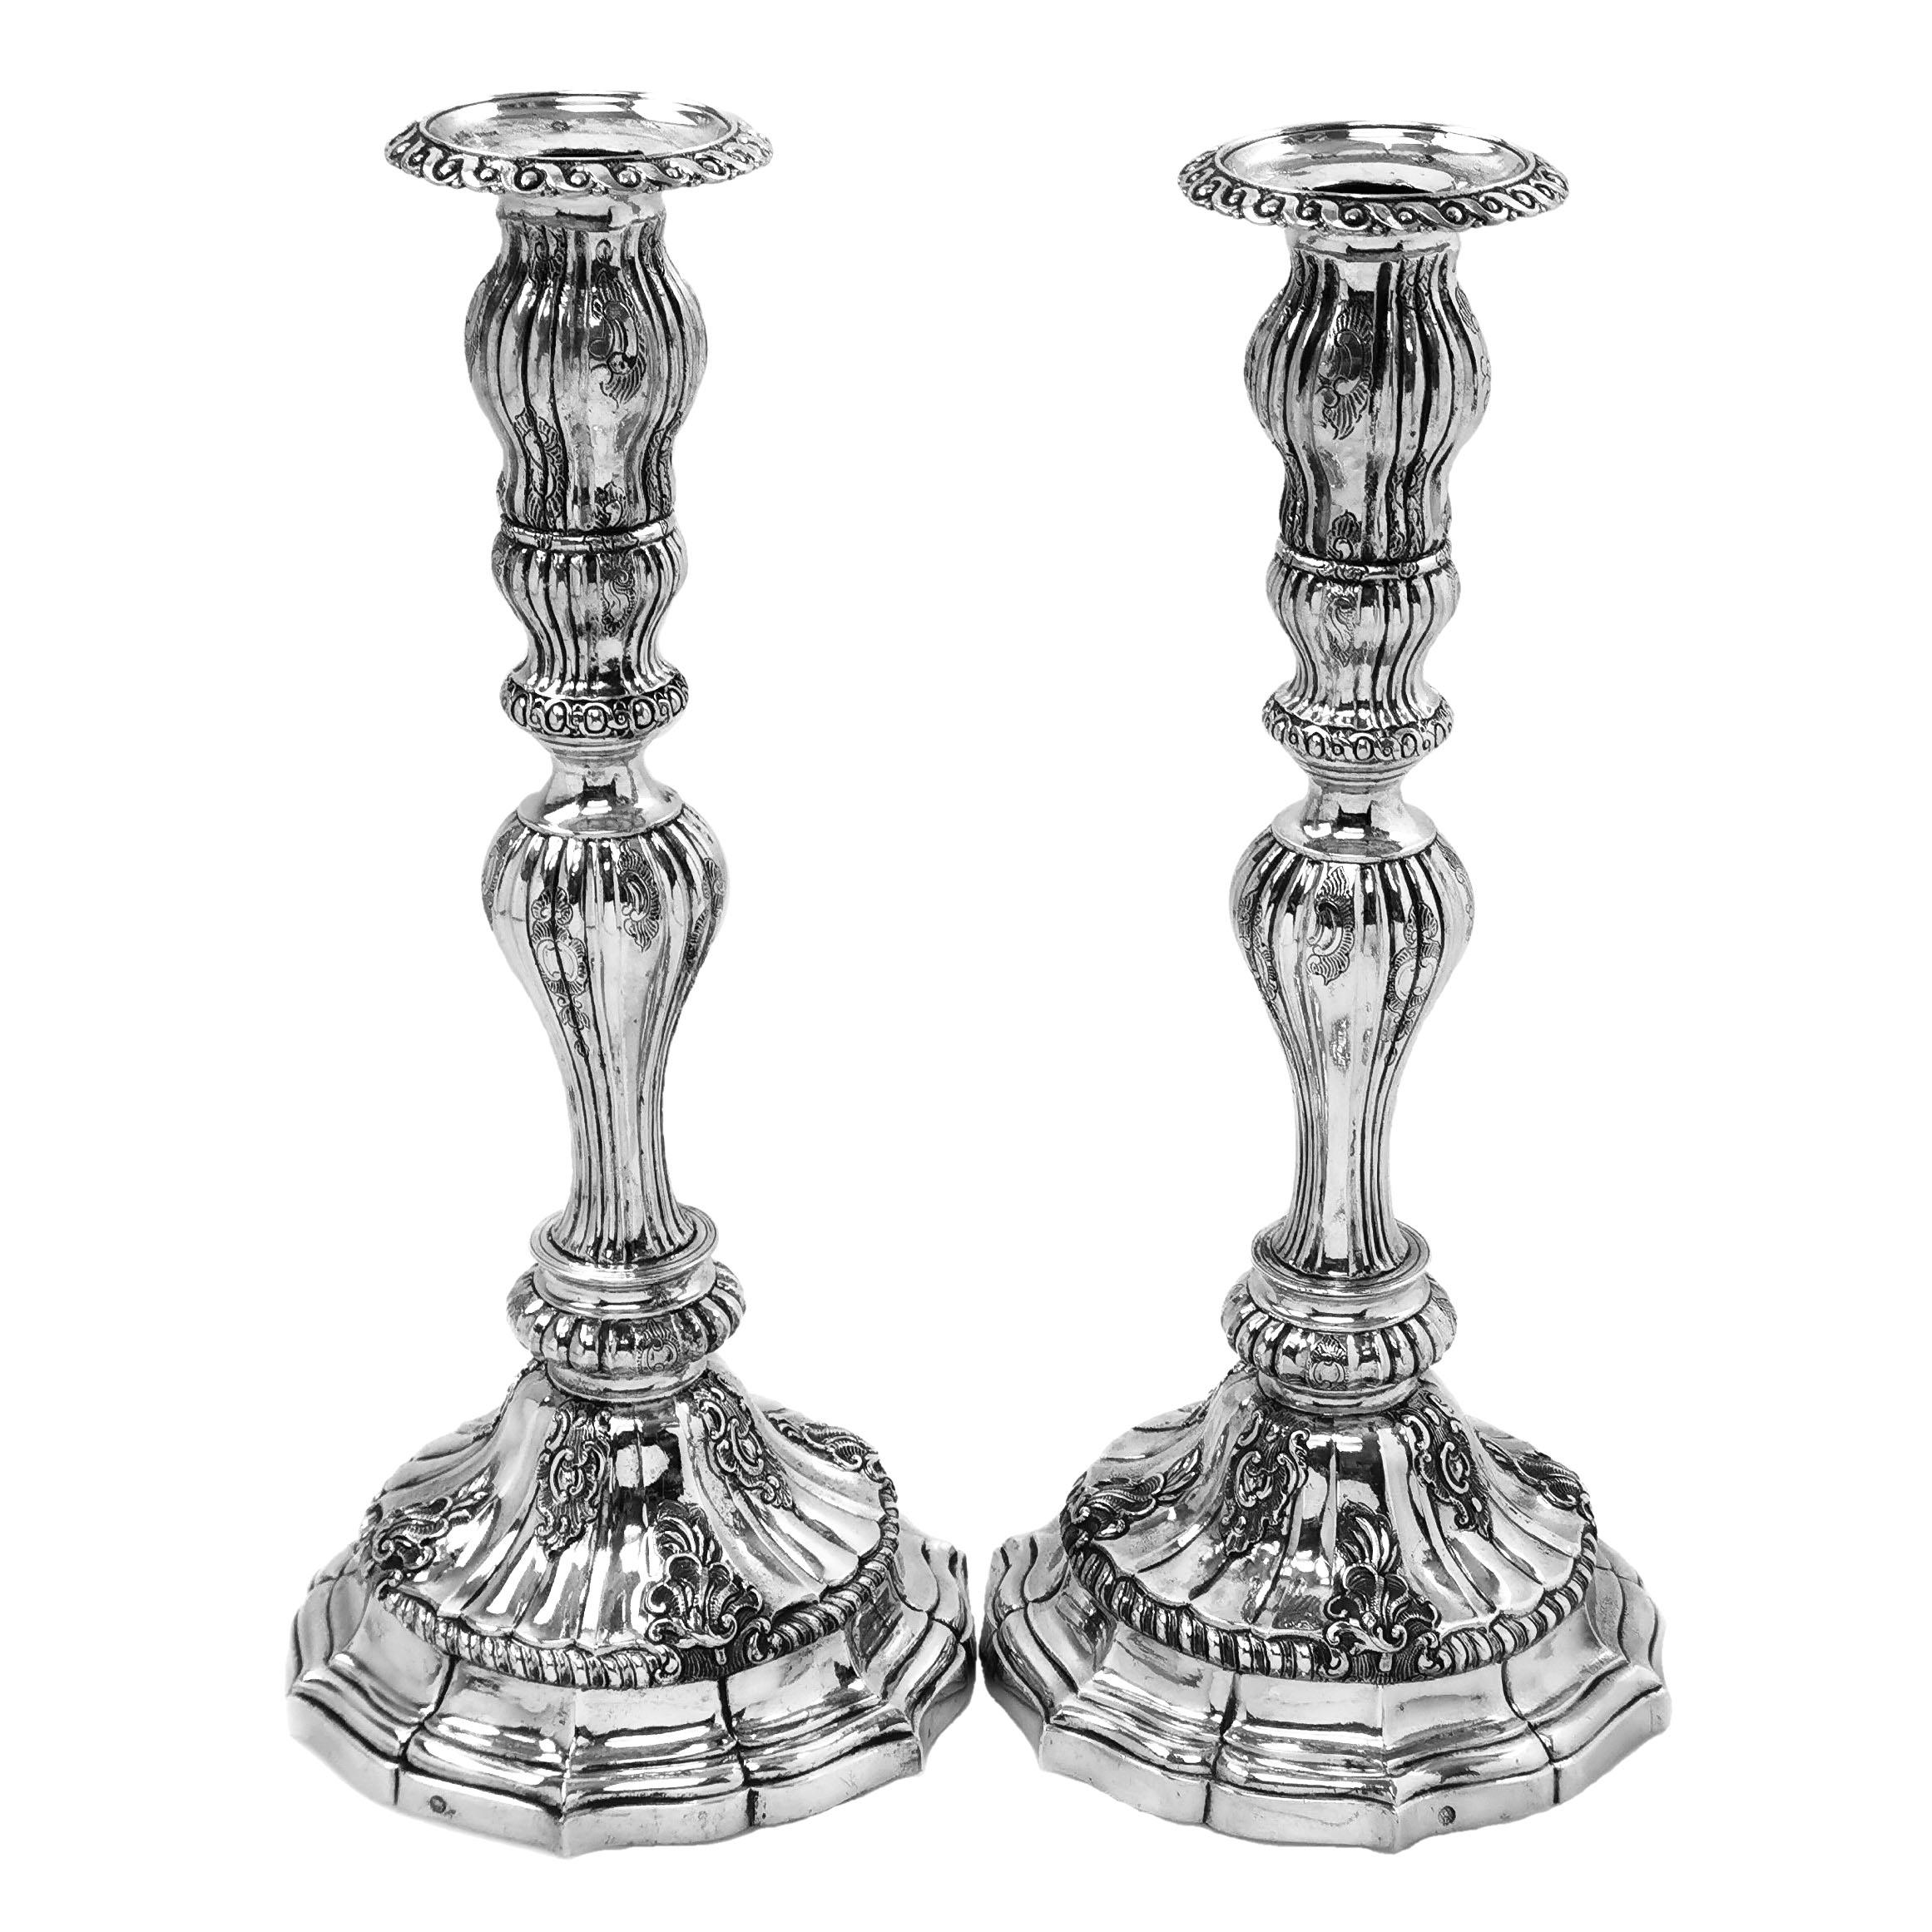 Rare Pair of Antique Portuguese Silver Candelabra c. 1800 19th Candle Holders In Good Condition For Sale In London, GB